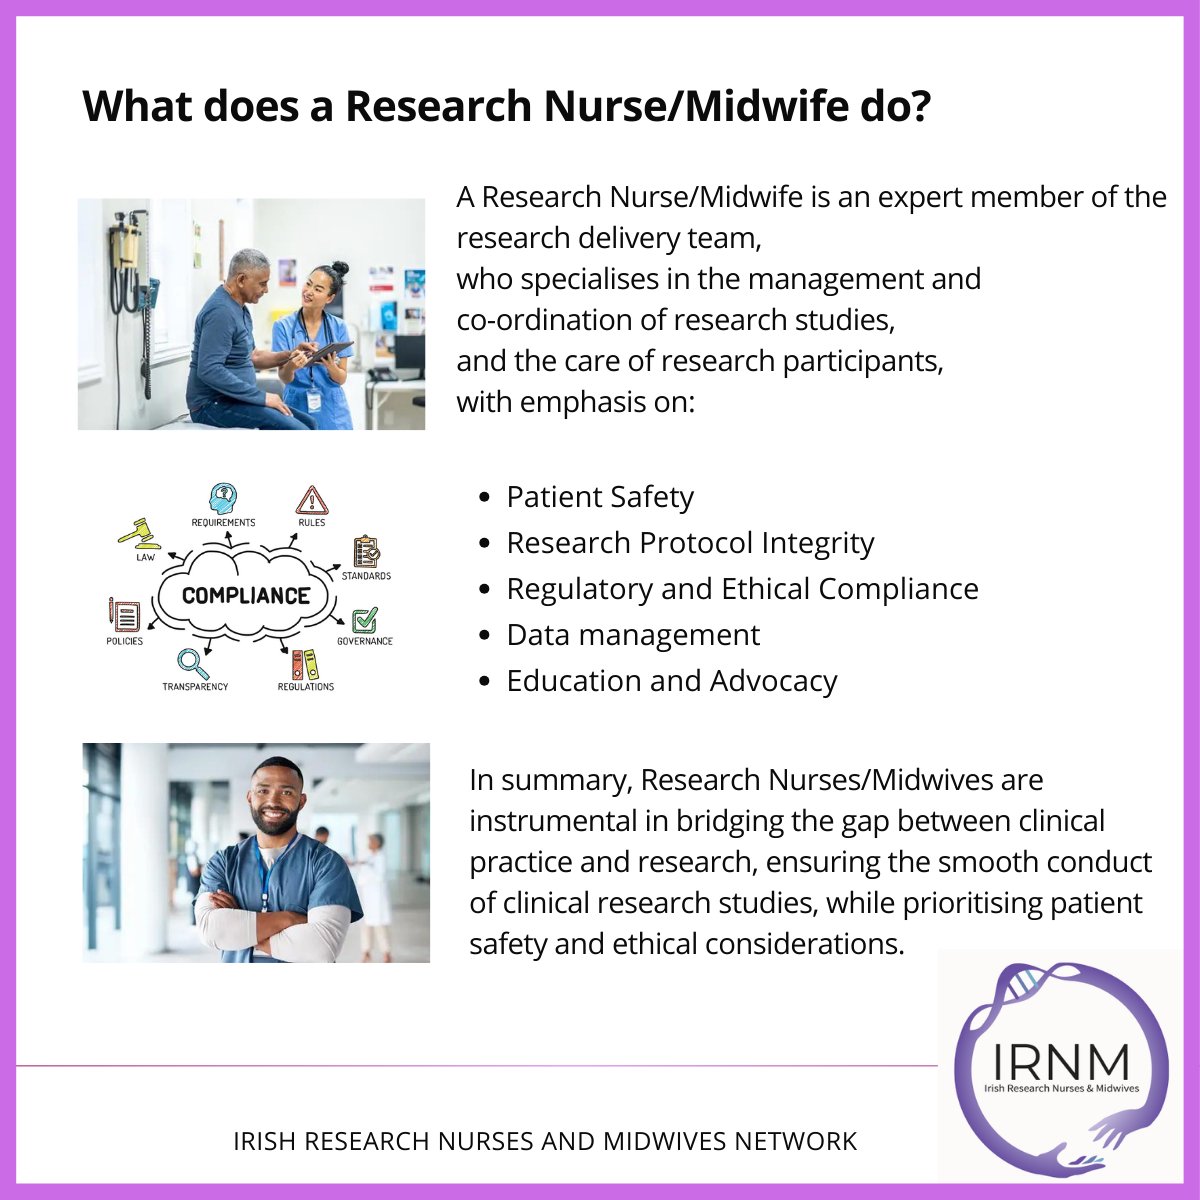 Stakeholder mapping revealed that 90% of stakeholders did not fully understand the role of the Research Nurse/Midwife and often confused us with Nurse Researchers. Lets fix this! #BuildingCapacity